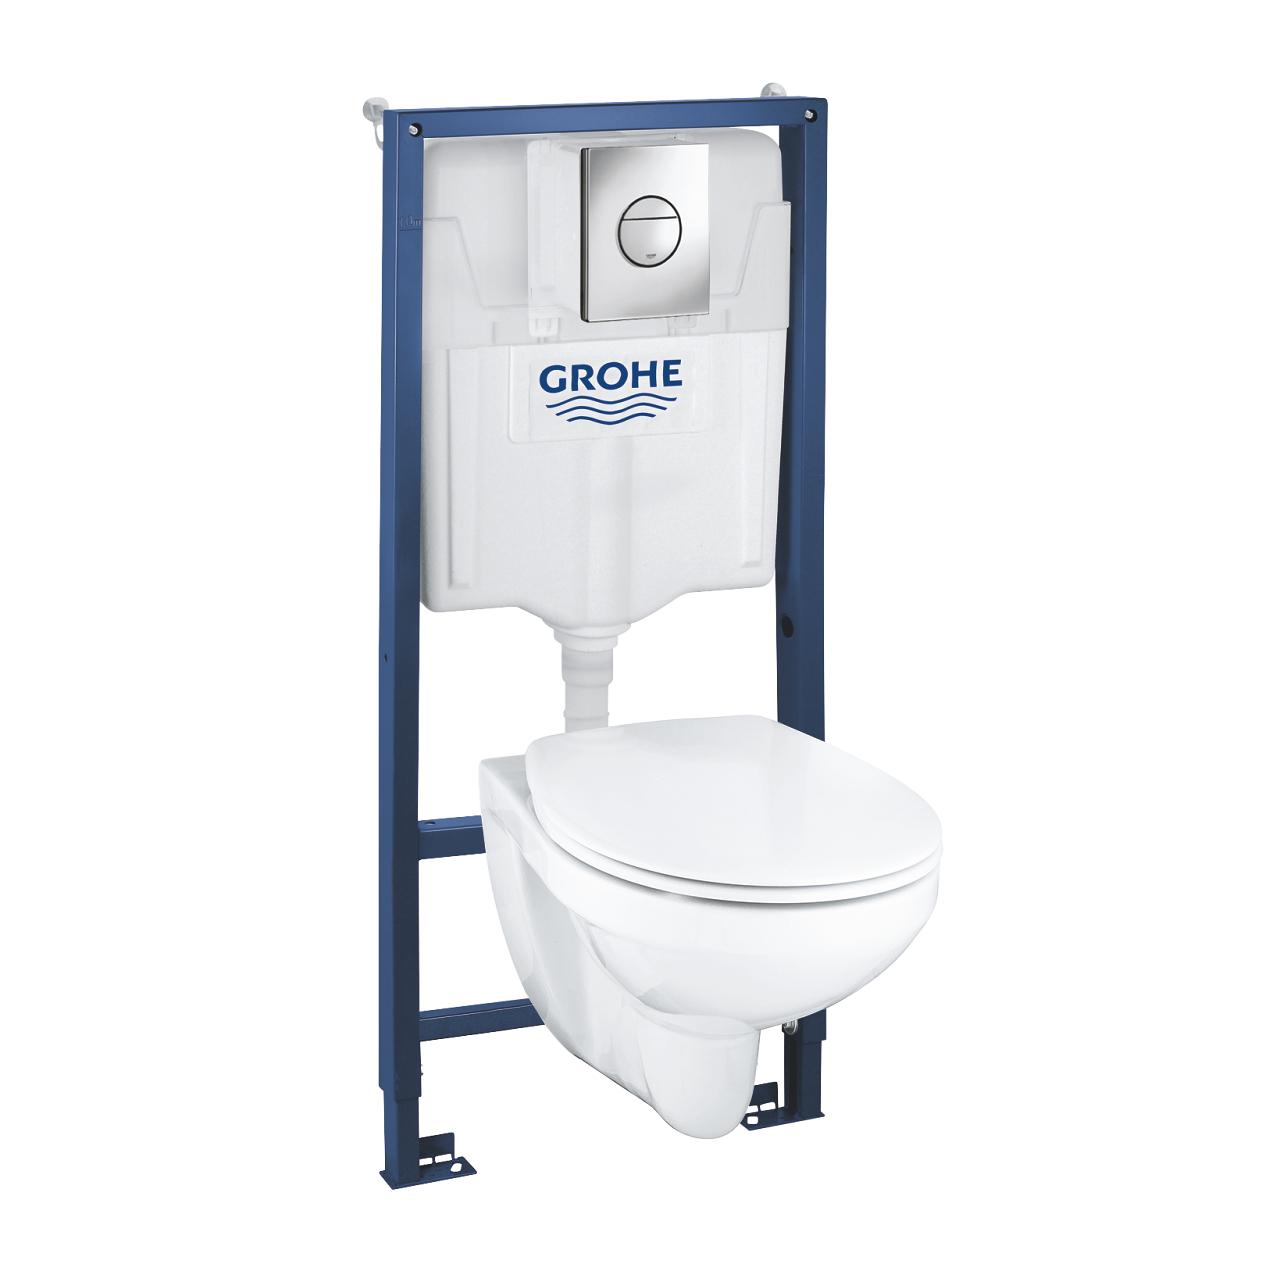 Grohe set – WC BauCeramic with seat SC, built-in frame h=1130mm, rinsing button Nova Cosmo 38765000, brackets, 39499000 cover photo